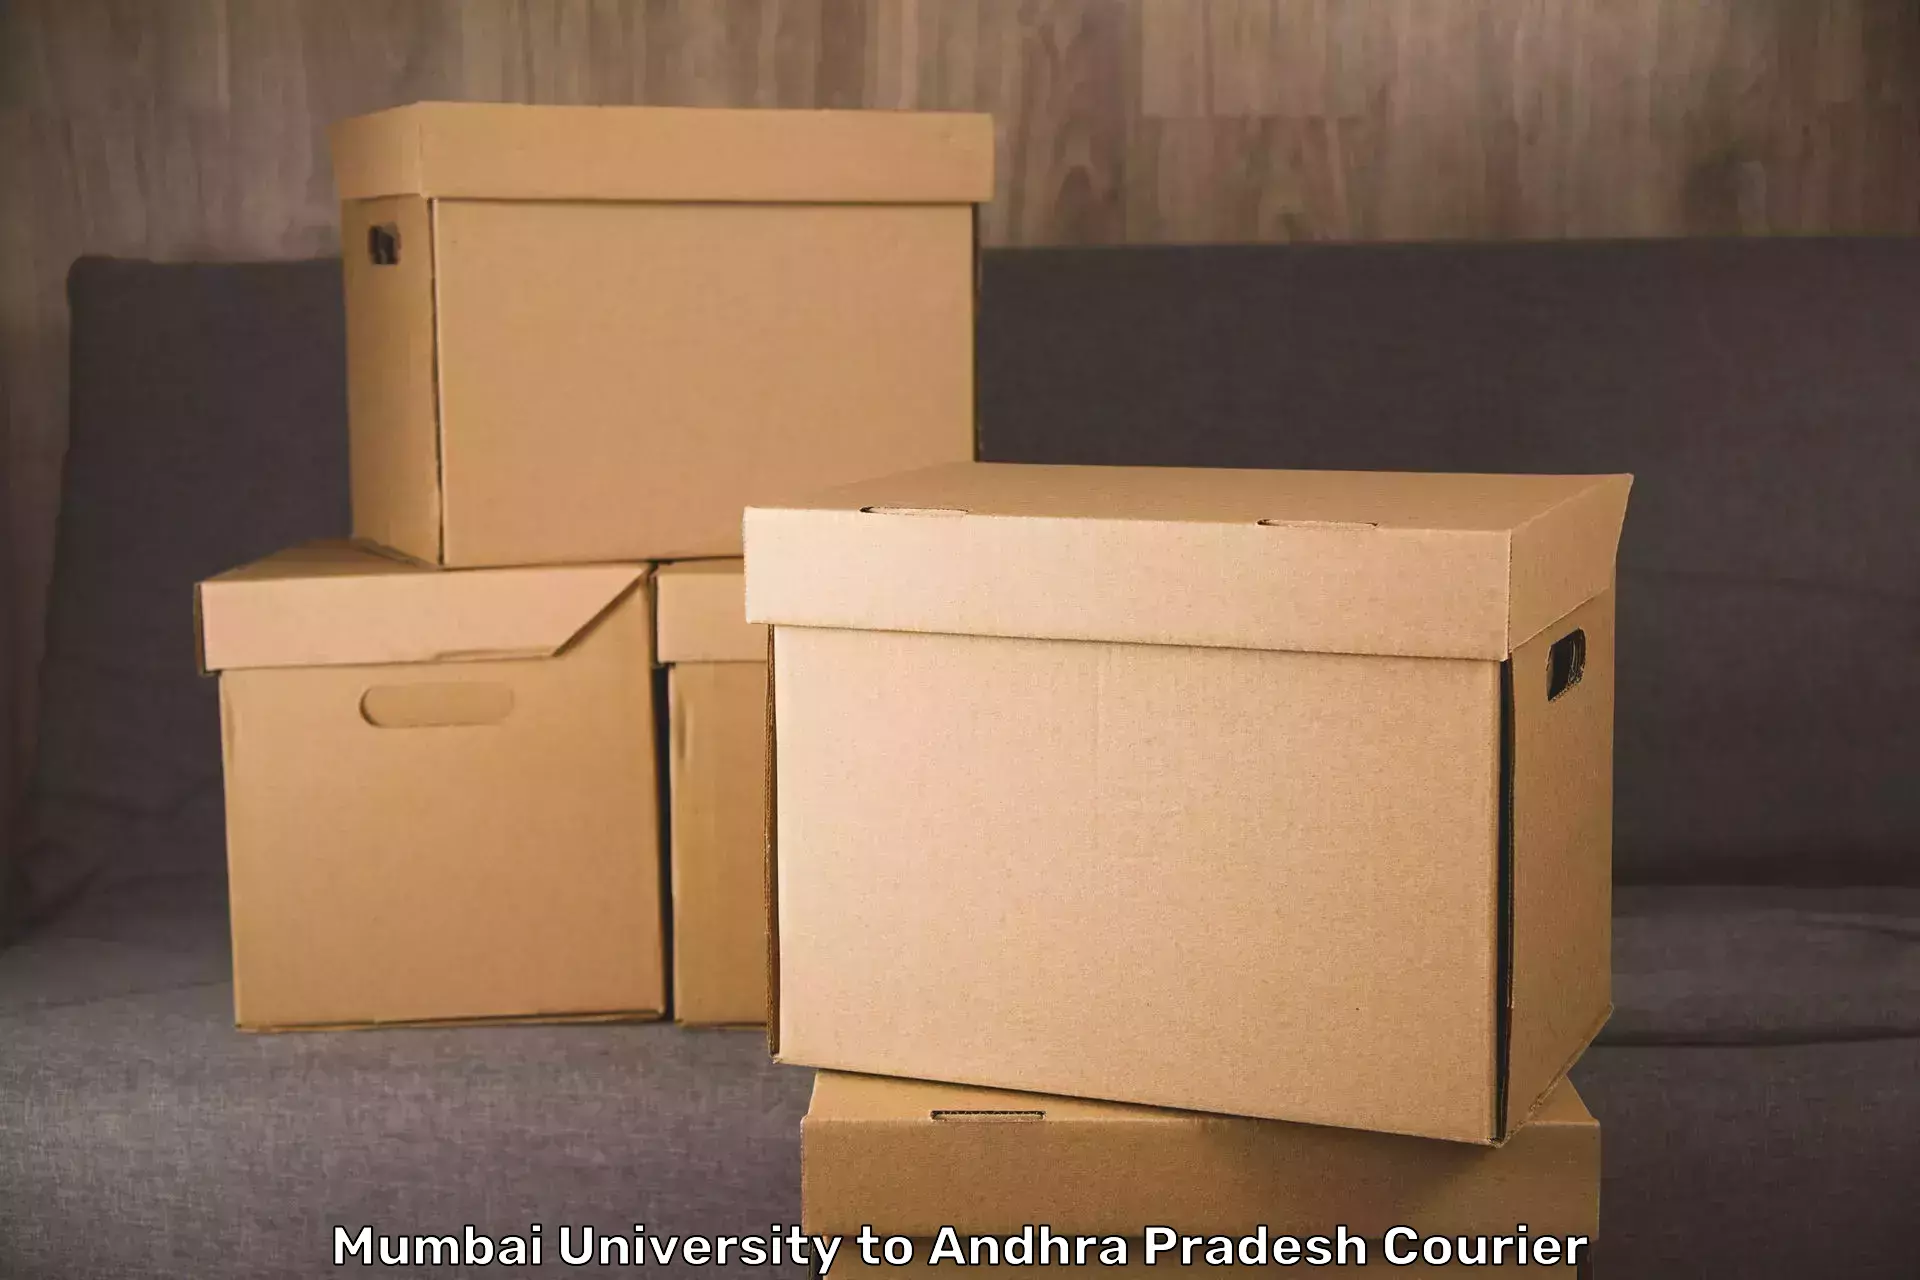 Online luggage shipping booking in Mumbai University to Challapalli